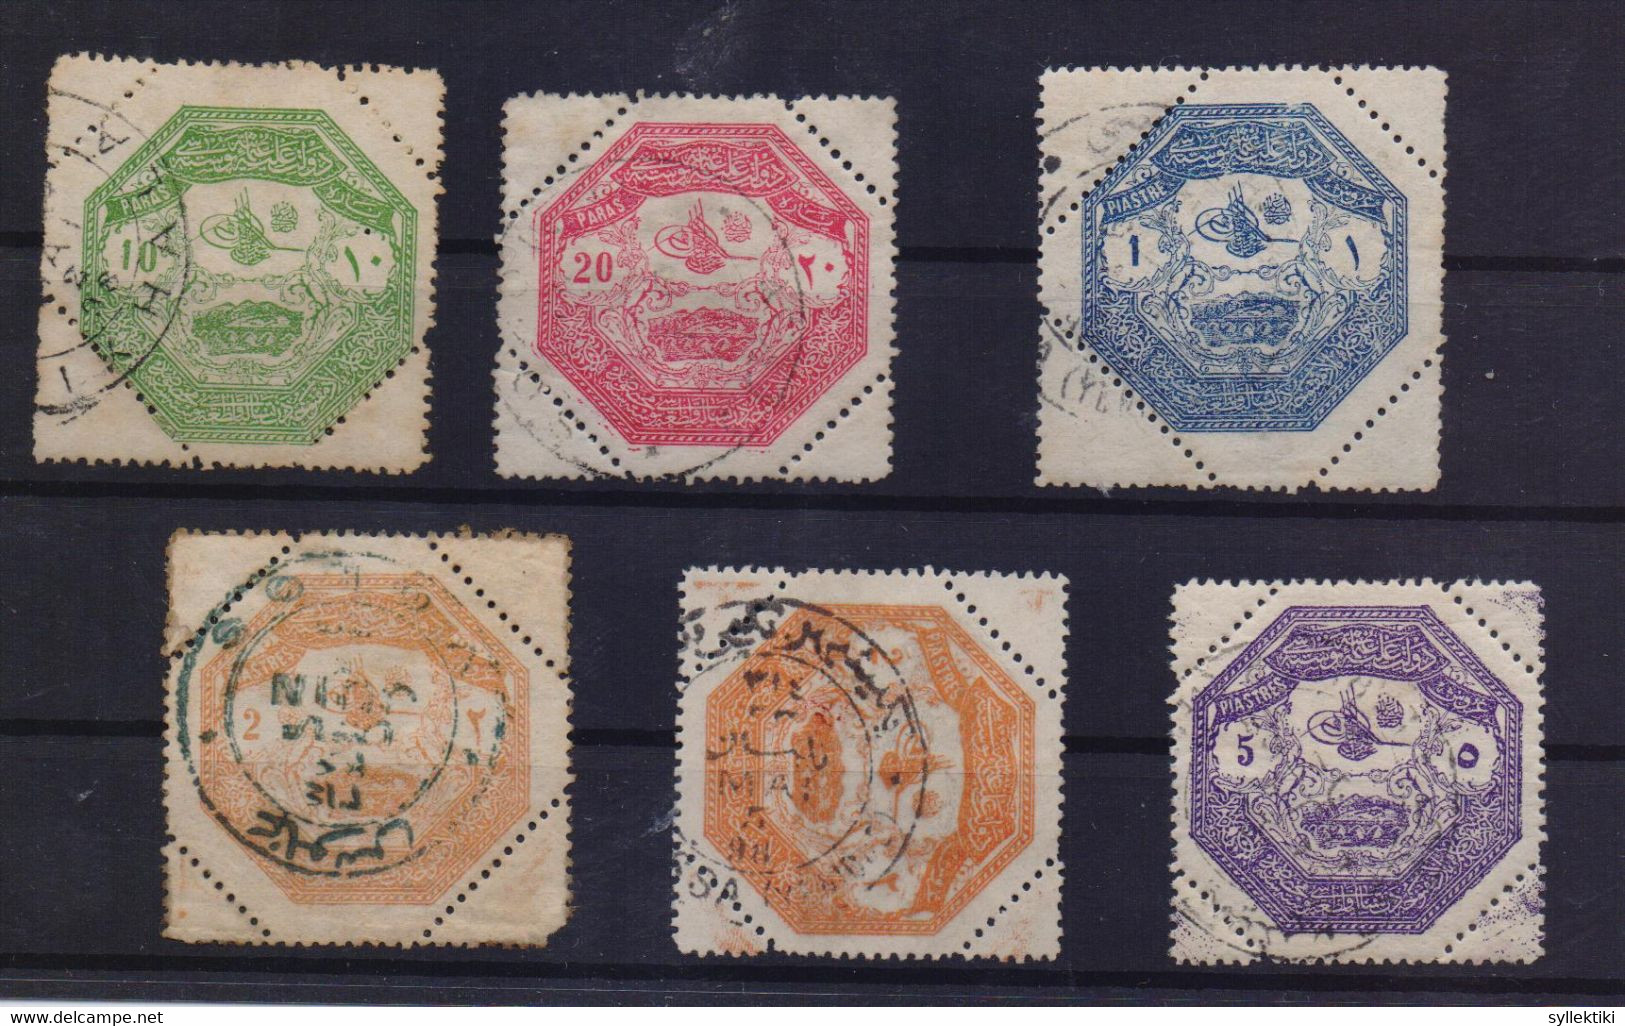 GREECE 1898 THESALLY COMPLETE SET USED STAMPS - Thessalien